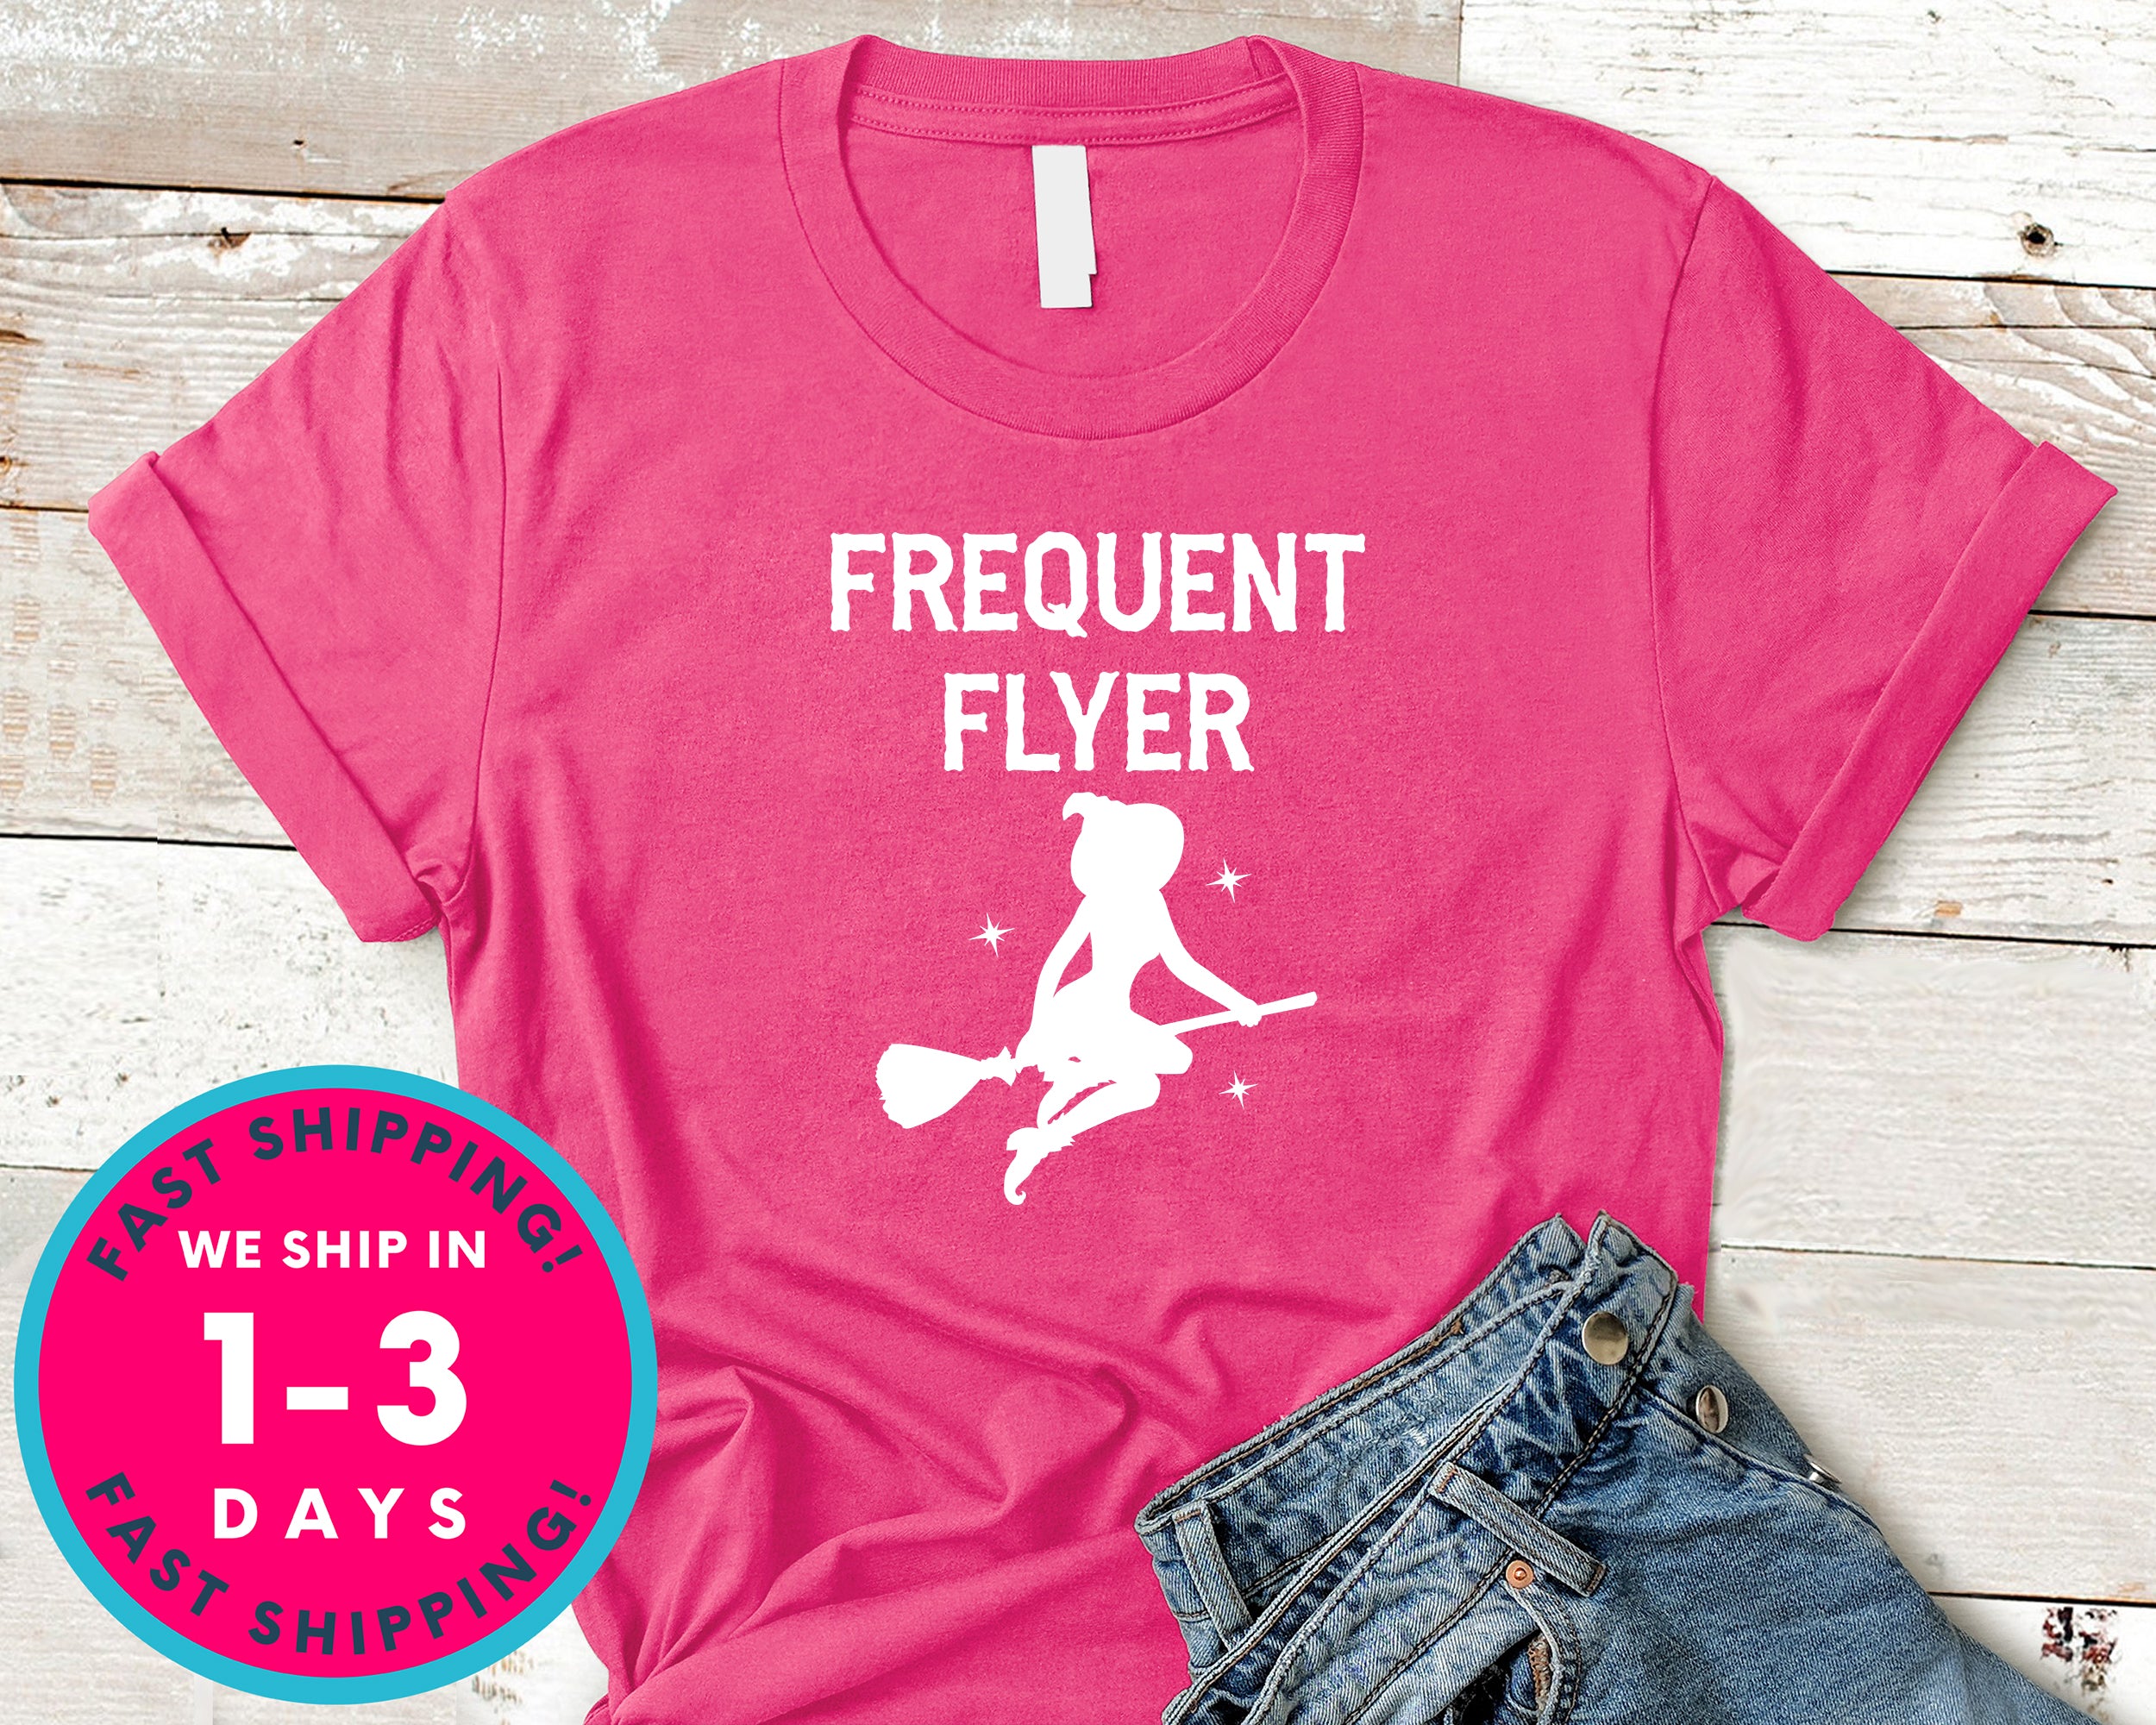 Frequent Flyer Witch Broom T-Shirt - Halloween Horror Scary Shirt